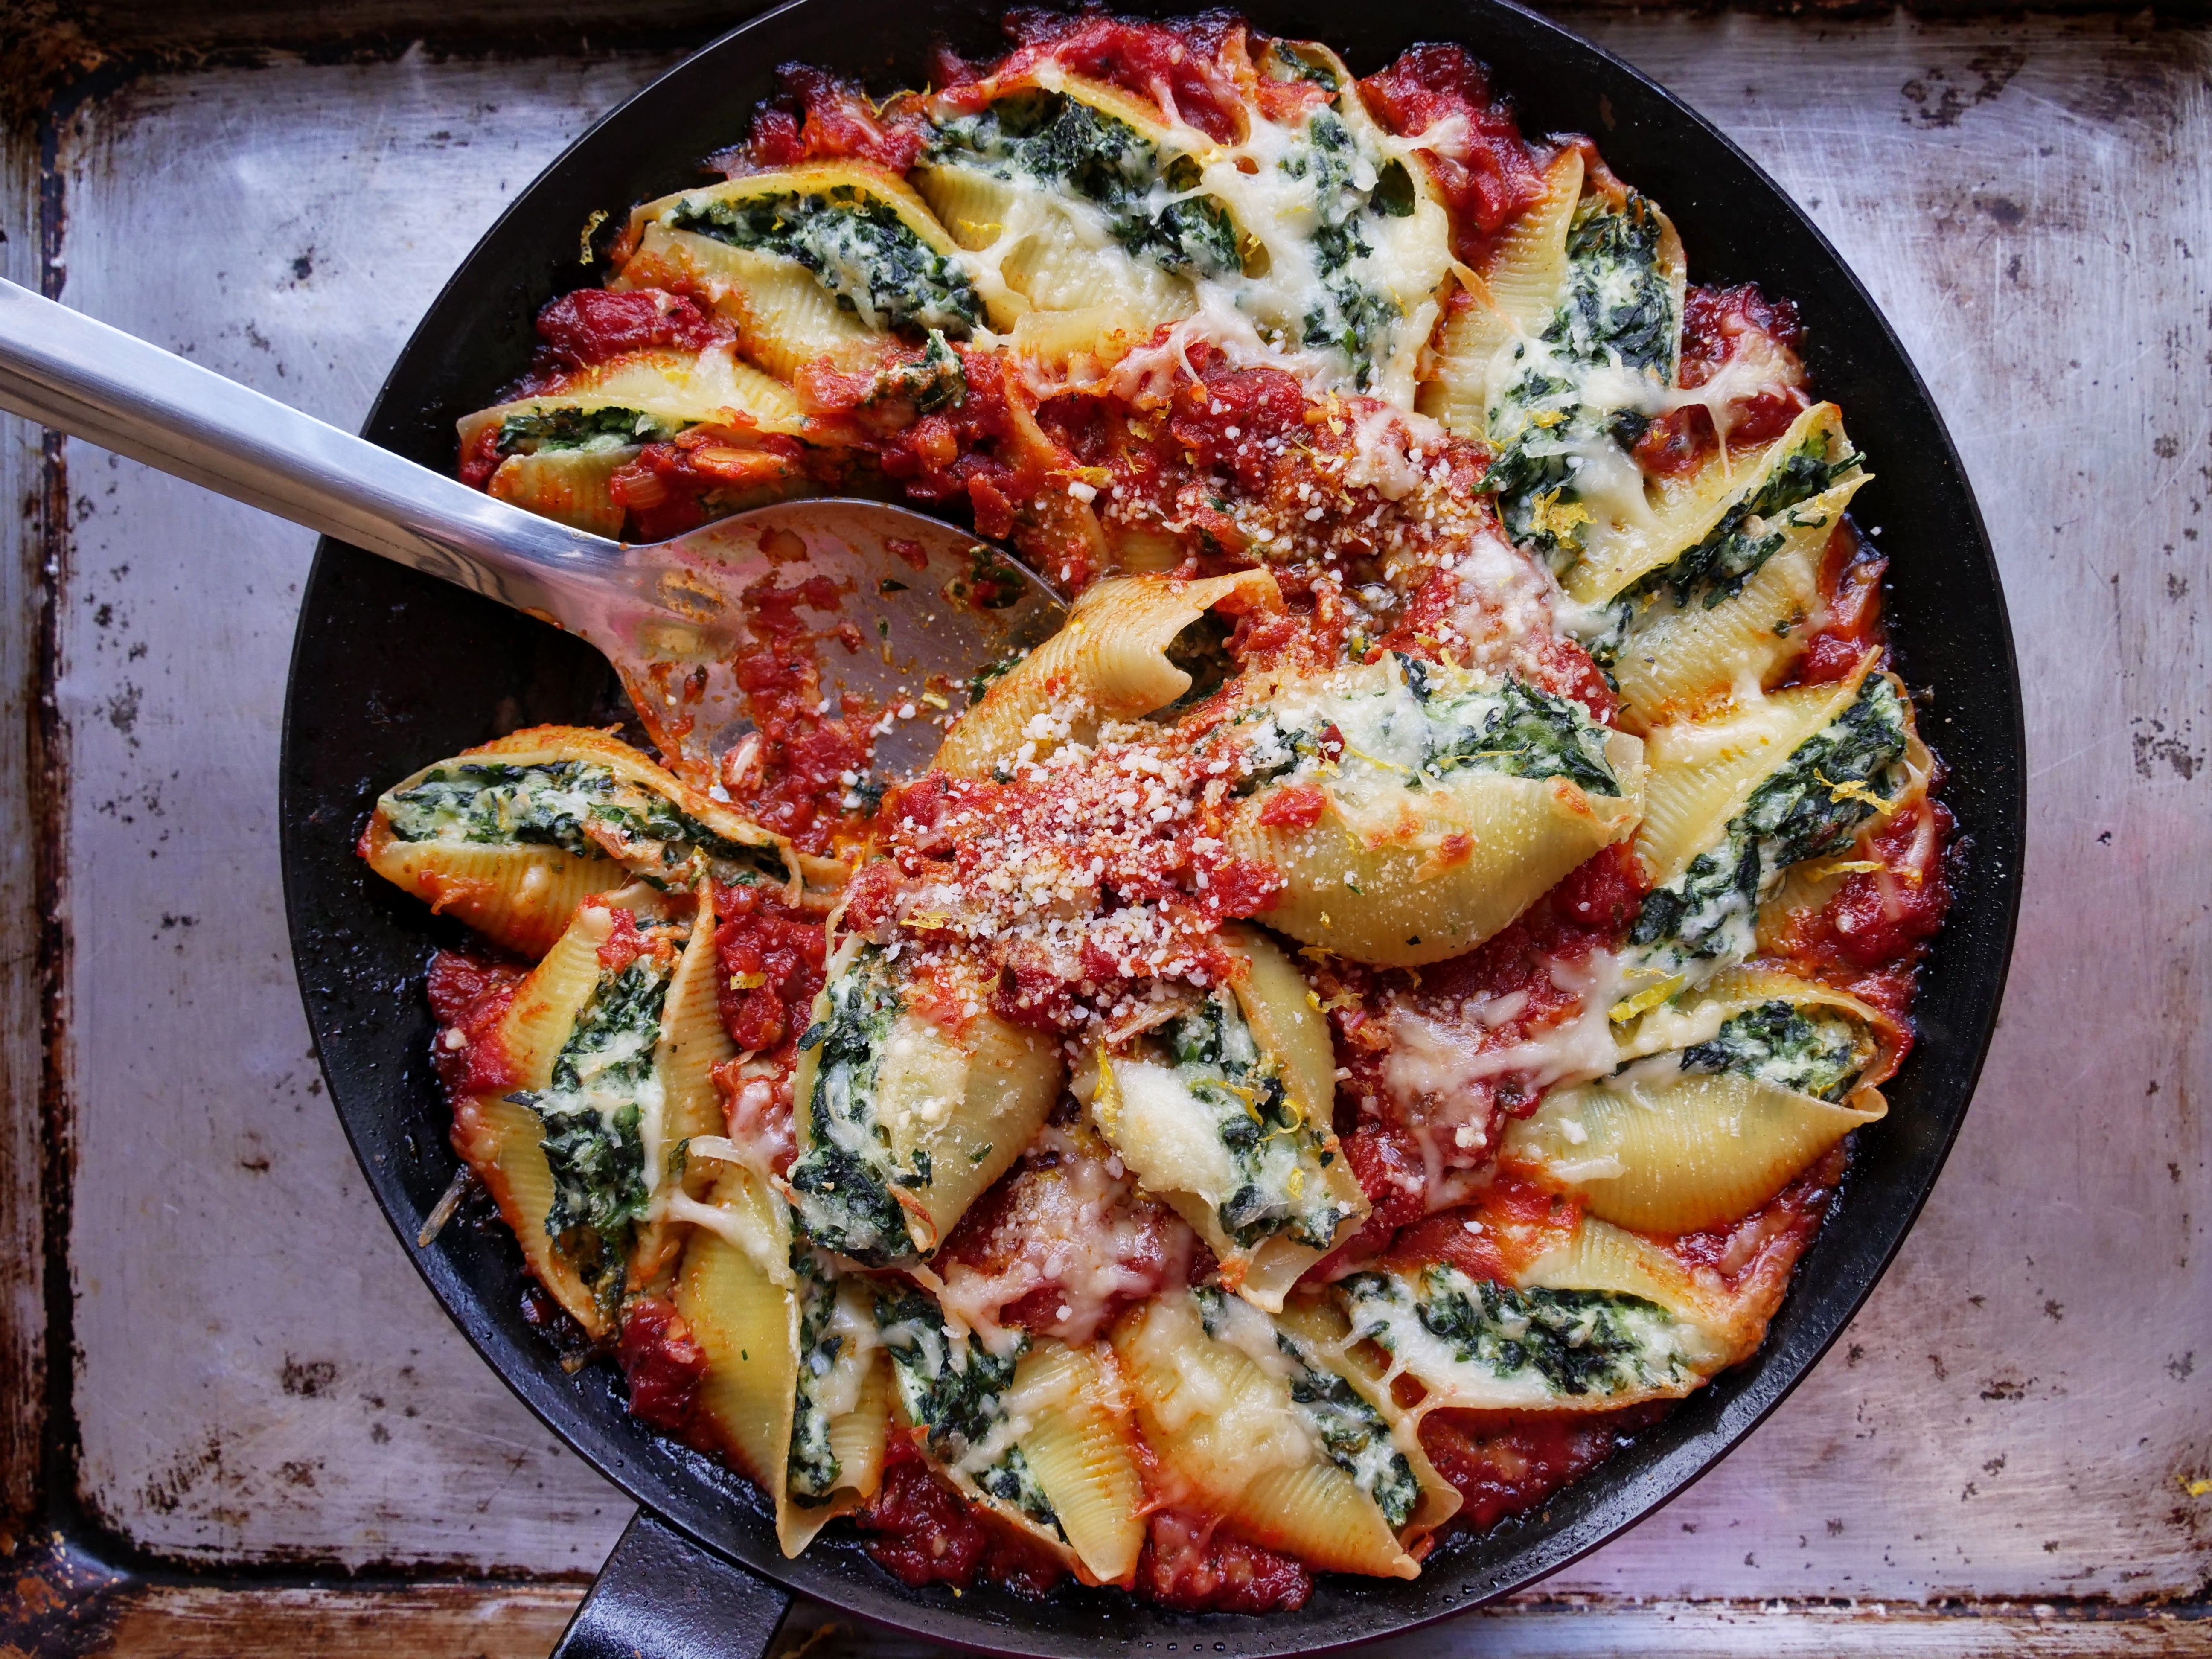 Stuffed Shells With Spinach — How To Make Spinach-Stuffed Shells